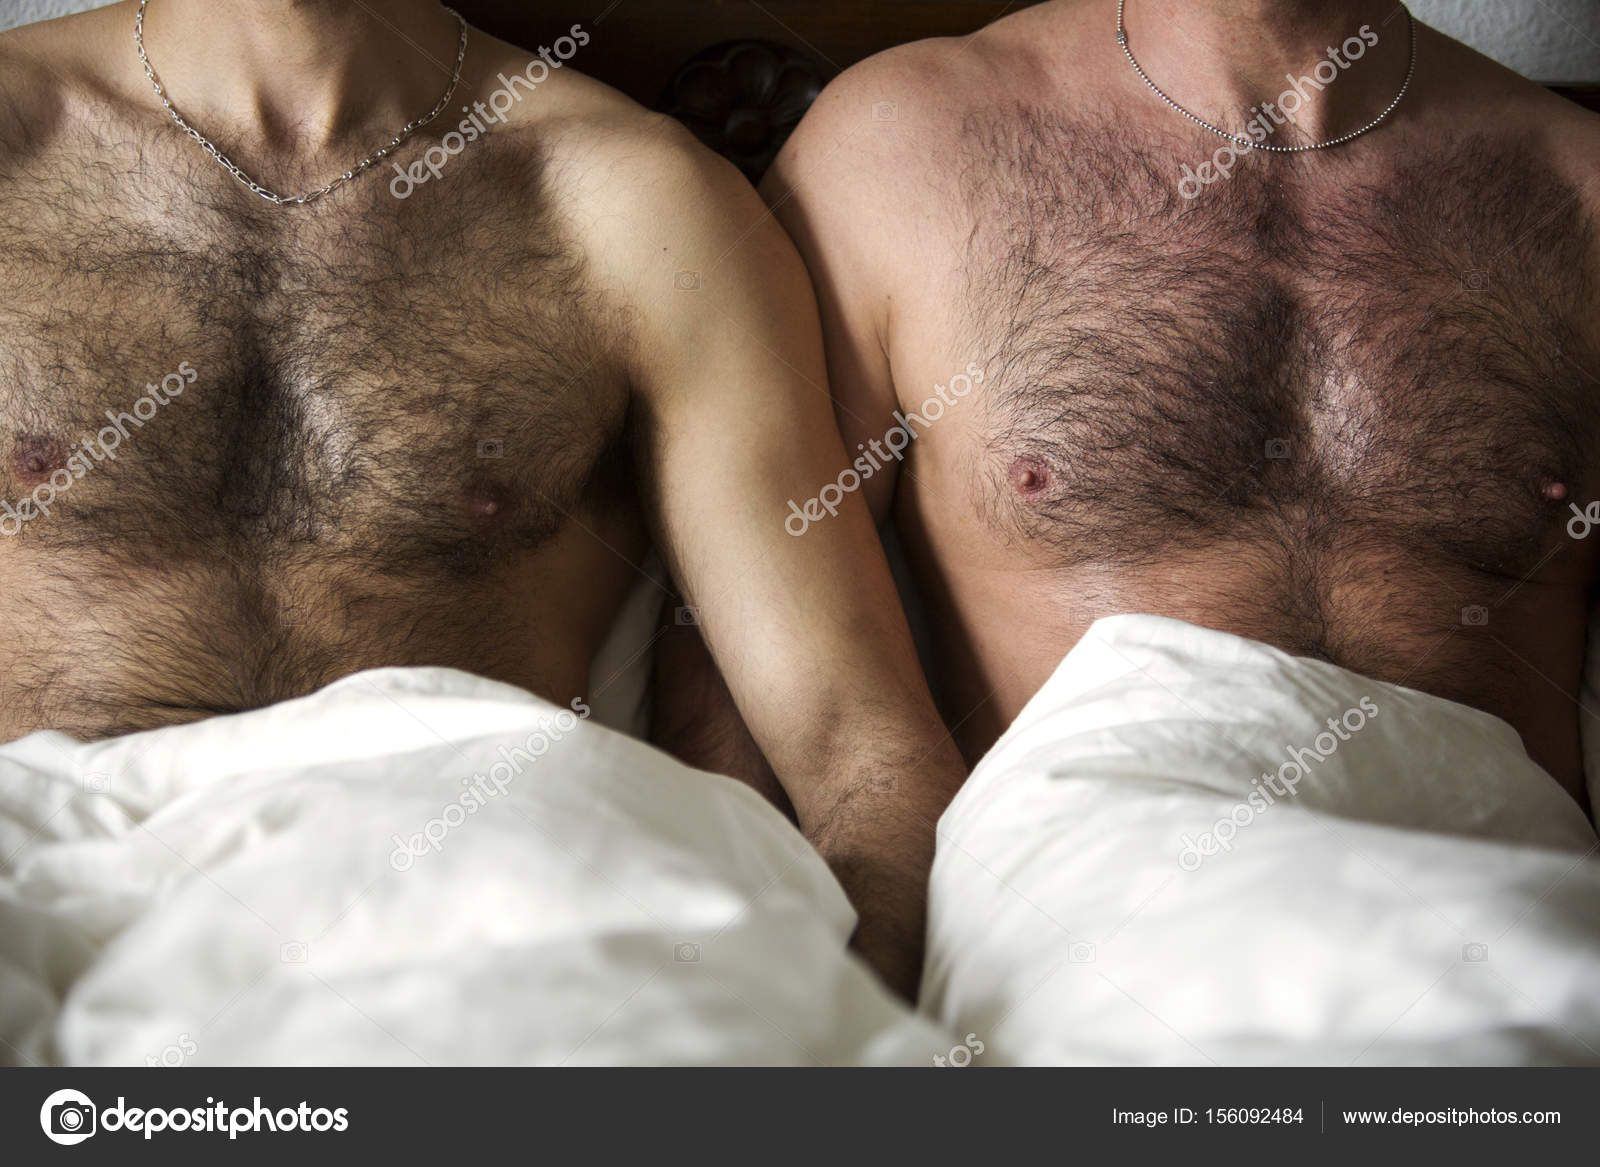 best of Naked men Two hairy